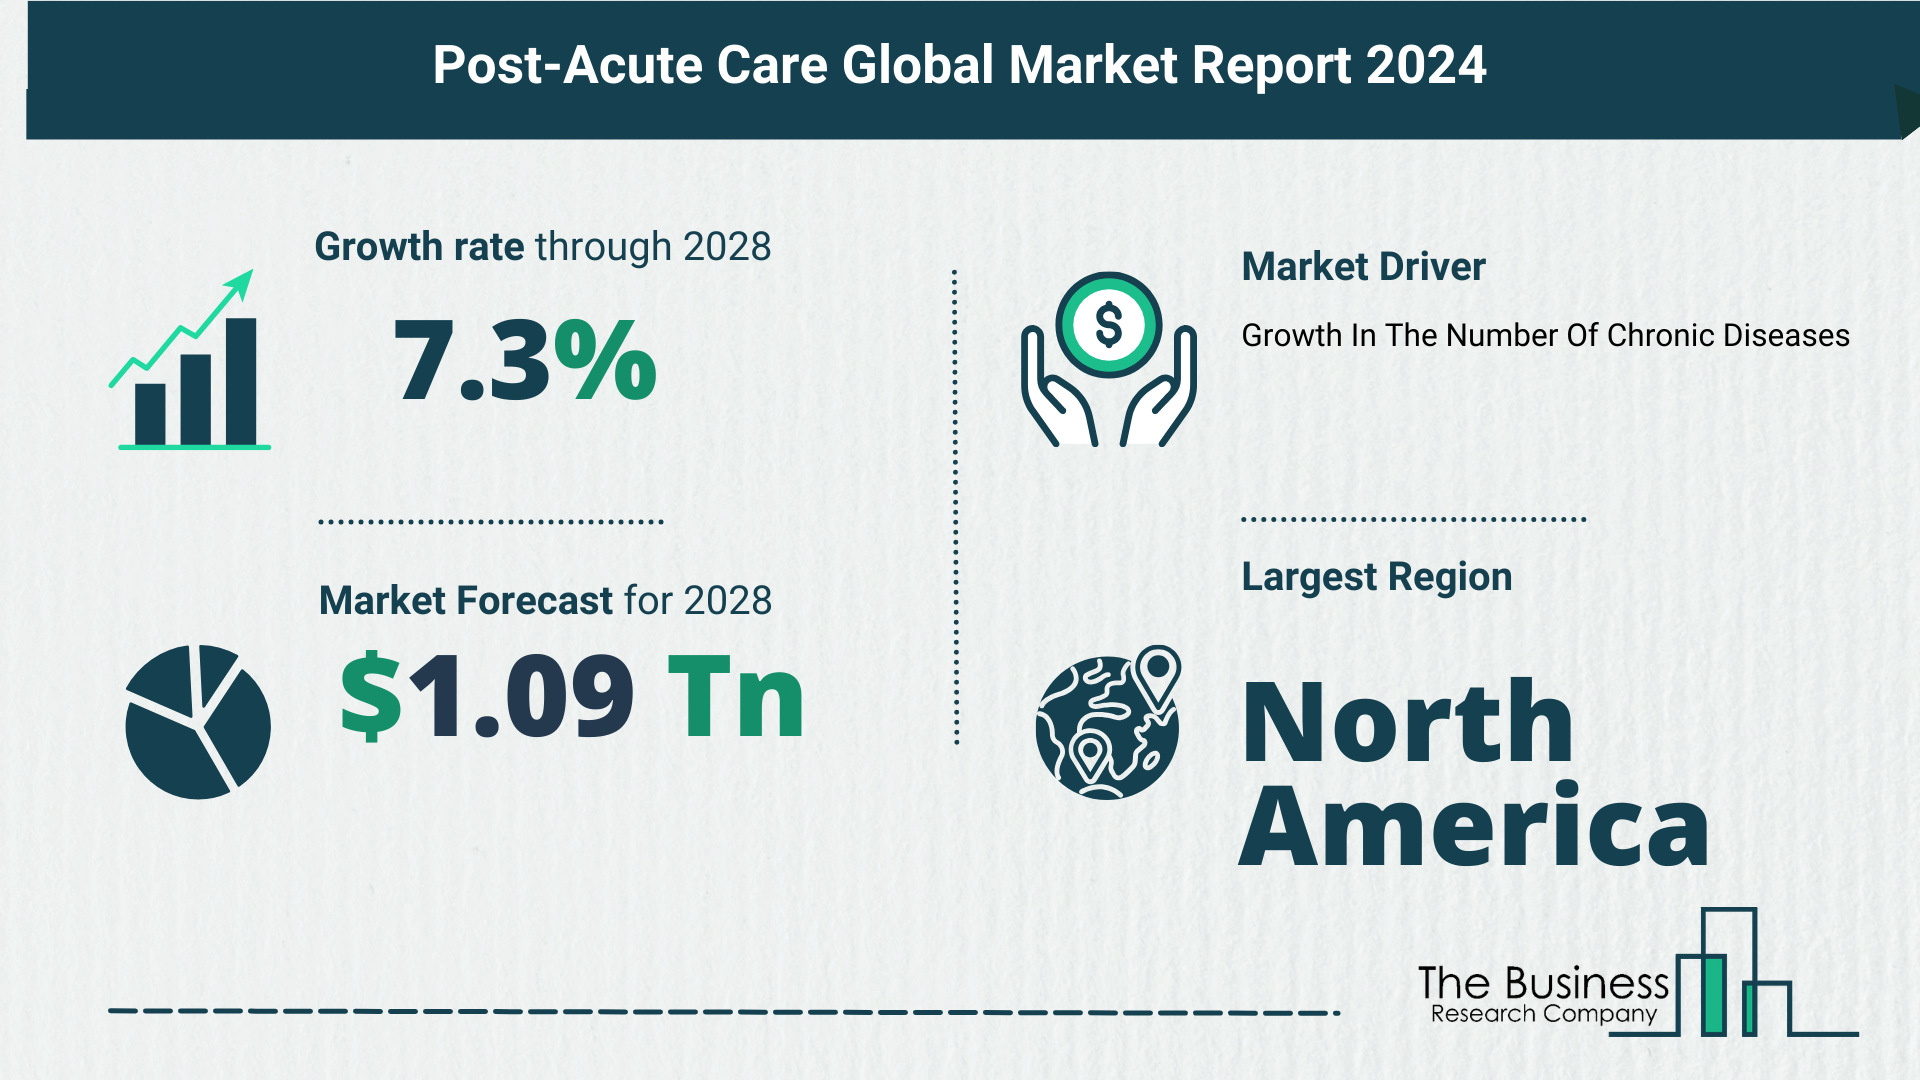 Key Insights On The Post-Acute Care Market 2024 – Size, Driver, And Major Players